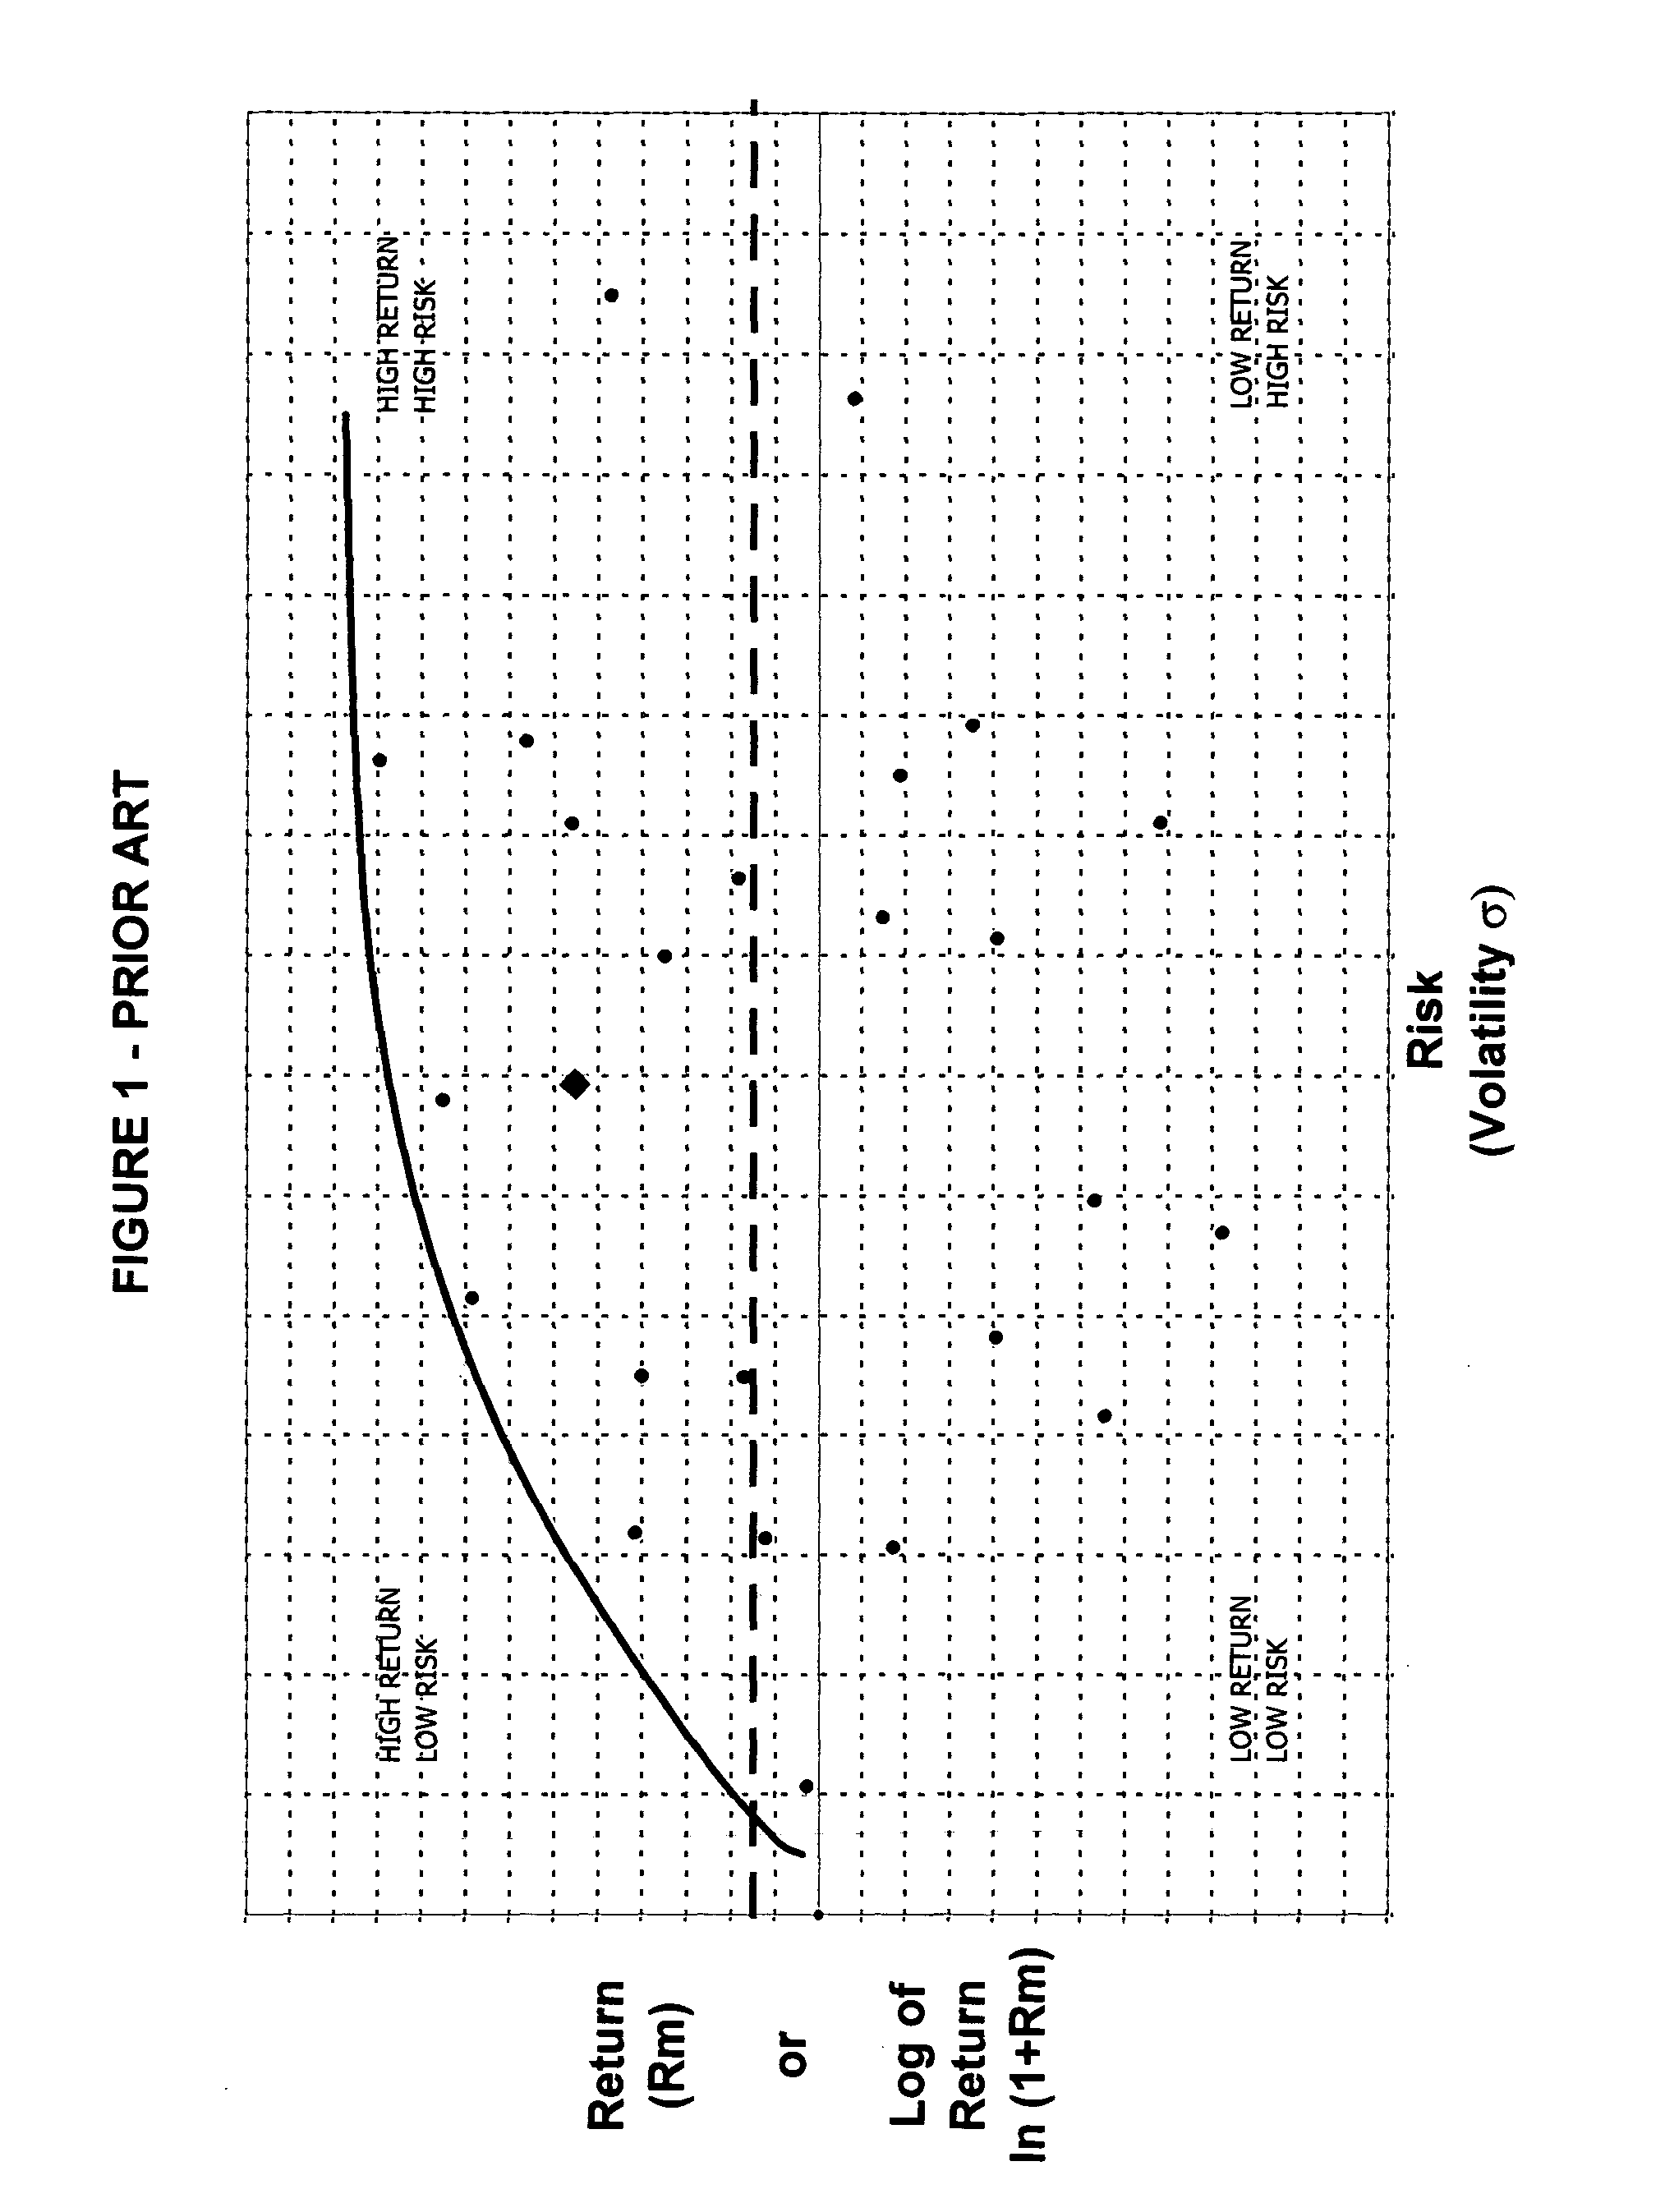 Method and apparatus for the topographical mapping of investment risk, safety and efficiency